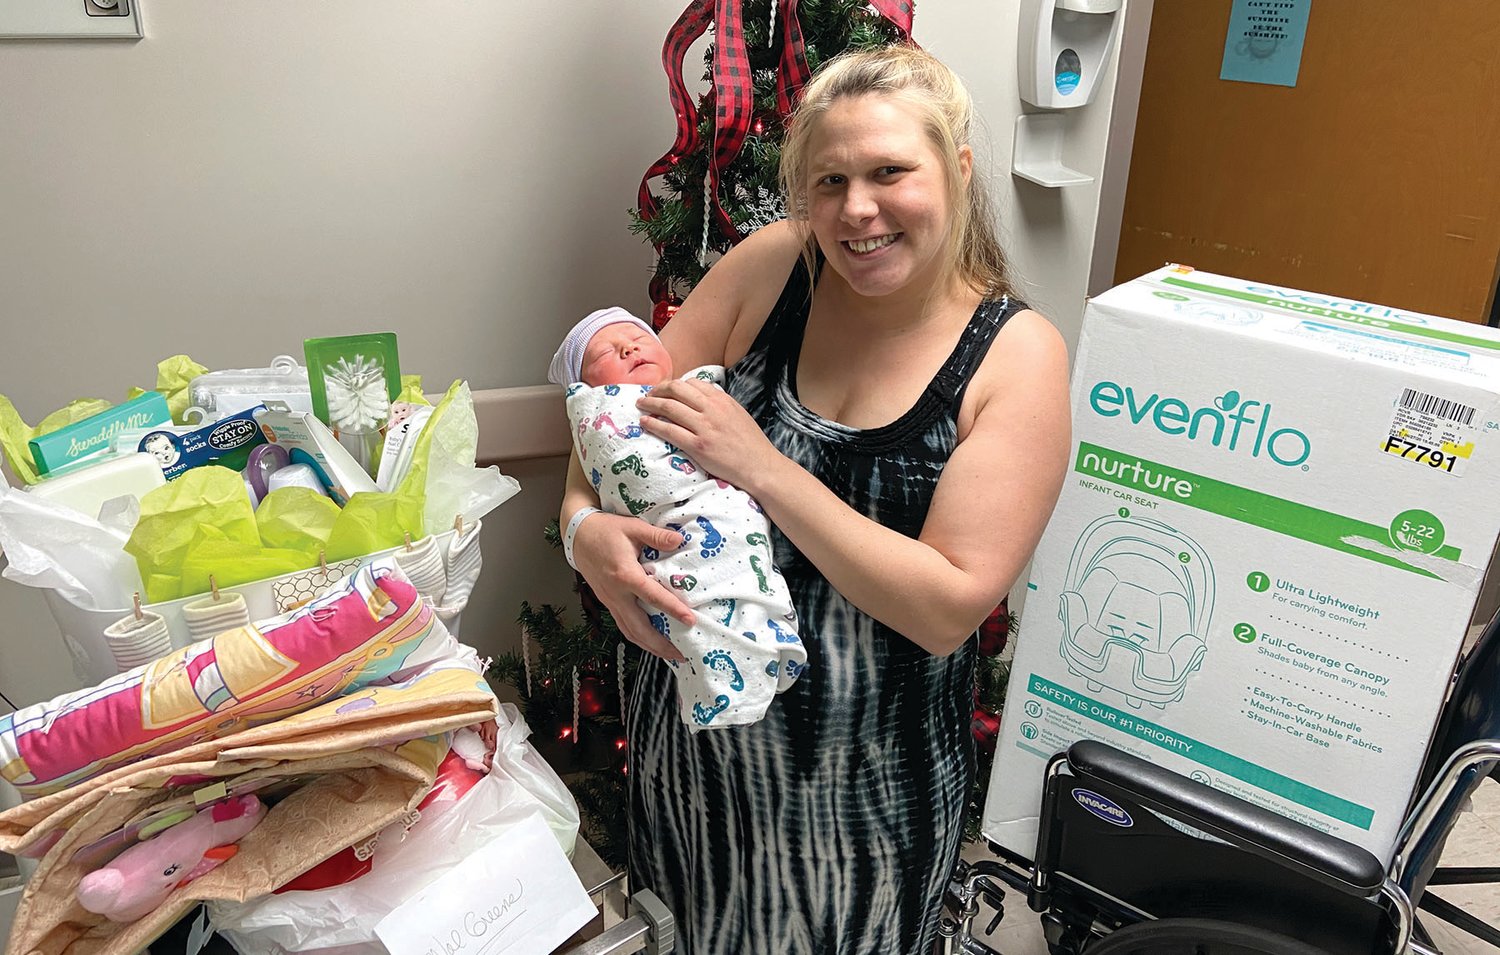 Elizabeth Grace Watkins was the first baby born at Texas County Memorial Hospital in 2021.